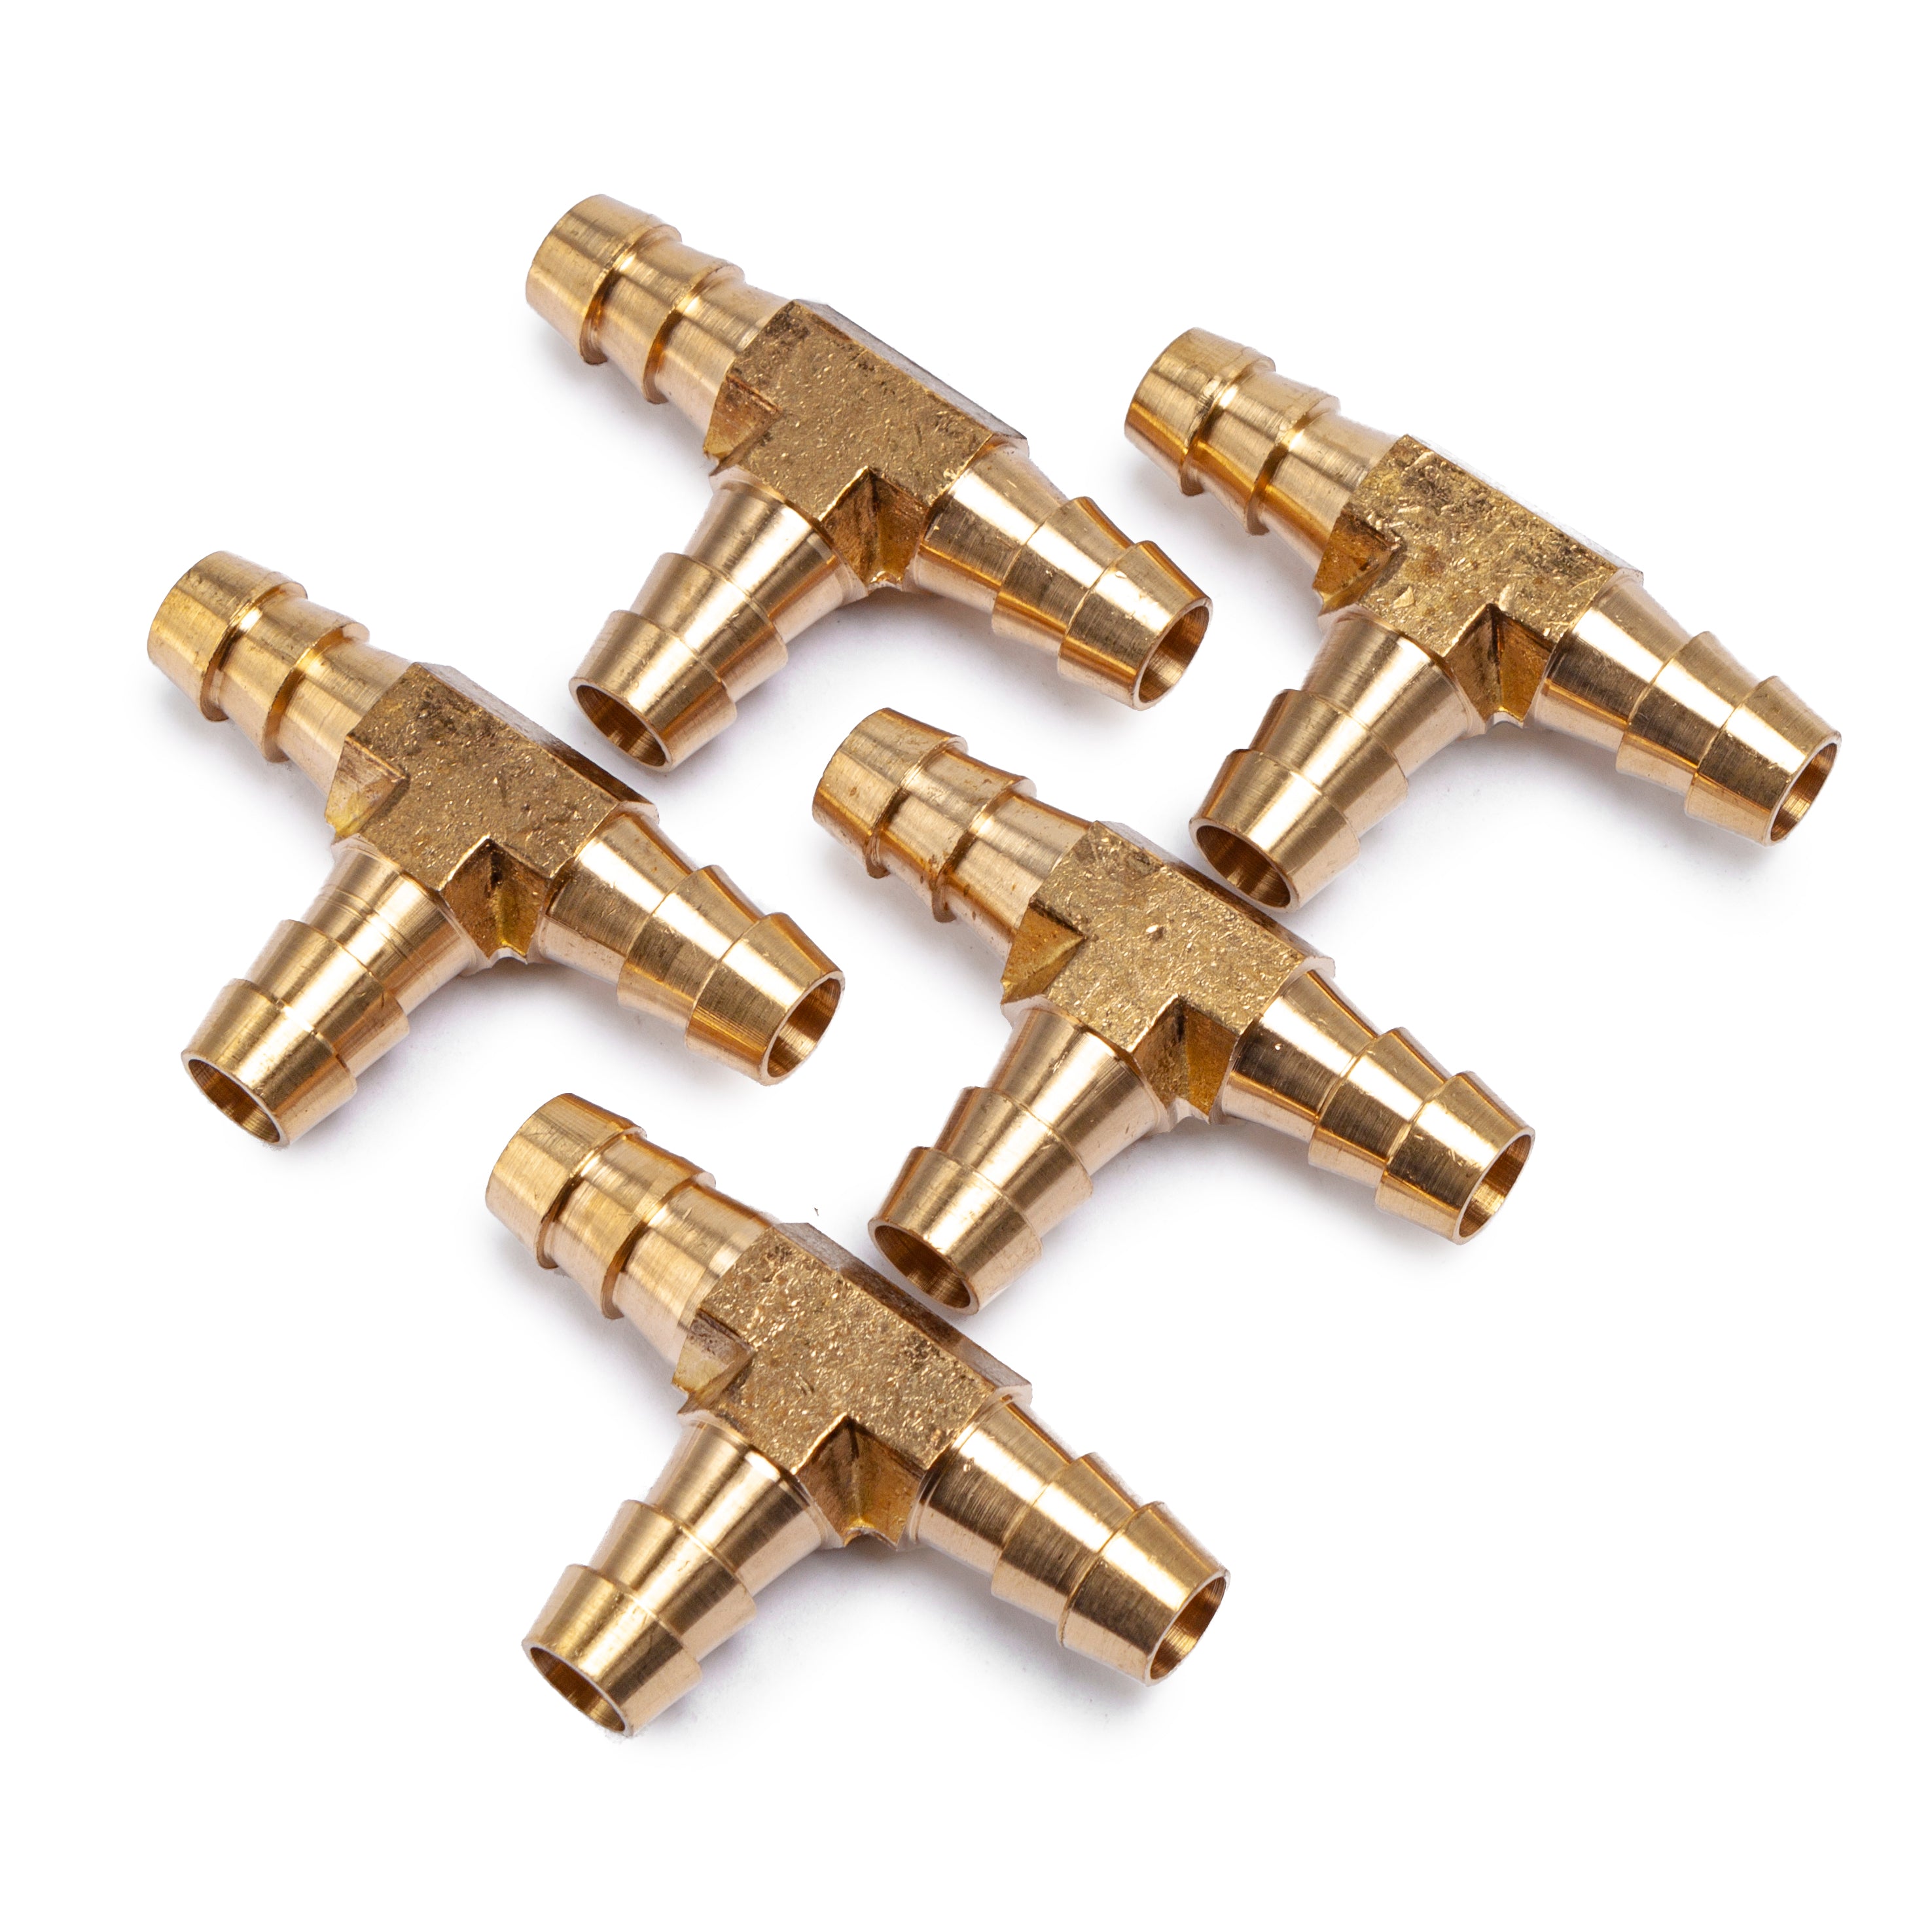 LTWFITTING Brass Barb Tee Fitting 3/8-Inch ID Hose for Water Fuel Boat(Pack of 5)